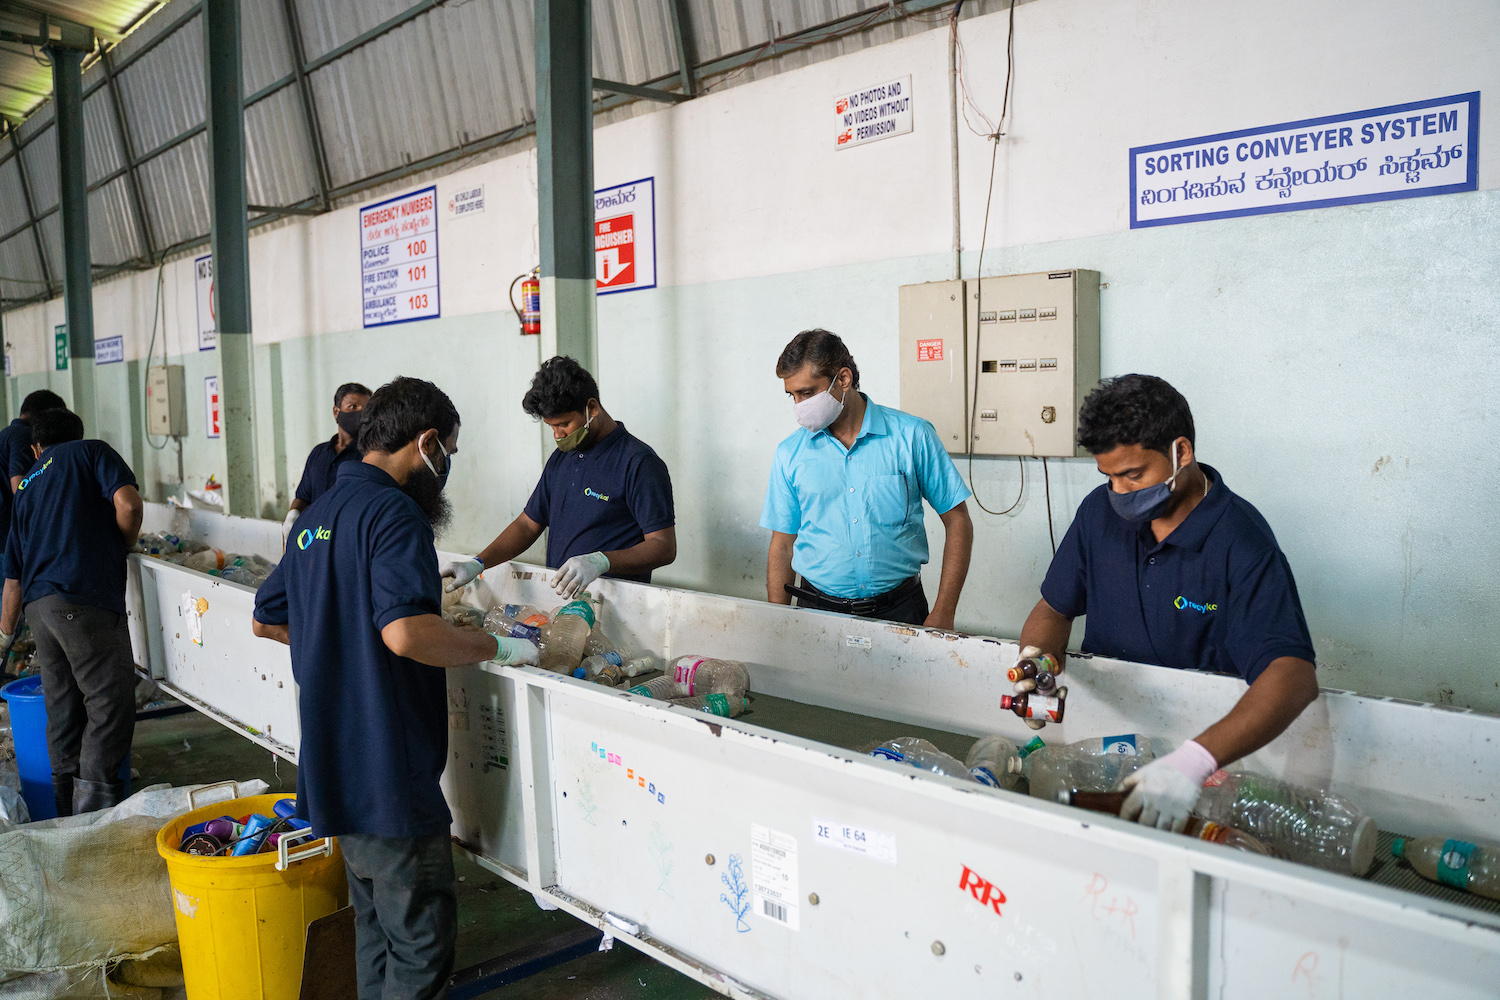 Members of the Recykal team separate recyclable materials at a recycling center that processes ocean-bound plastic pollution and other materials in Bengaluru, India.